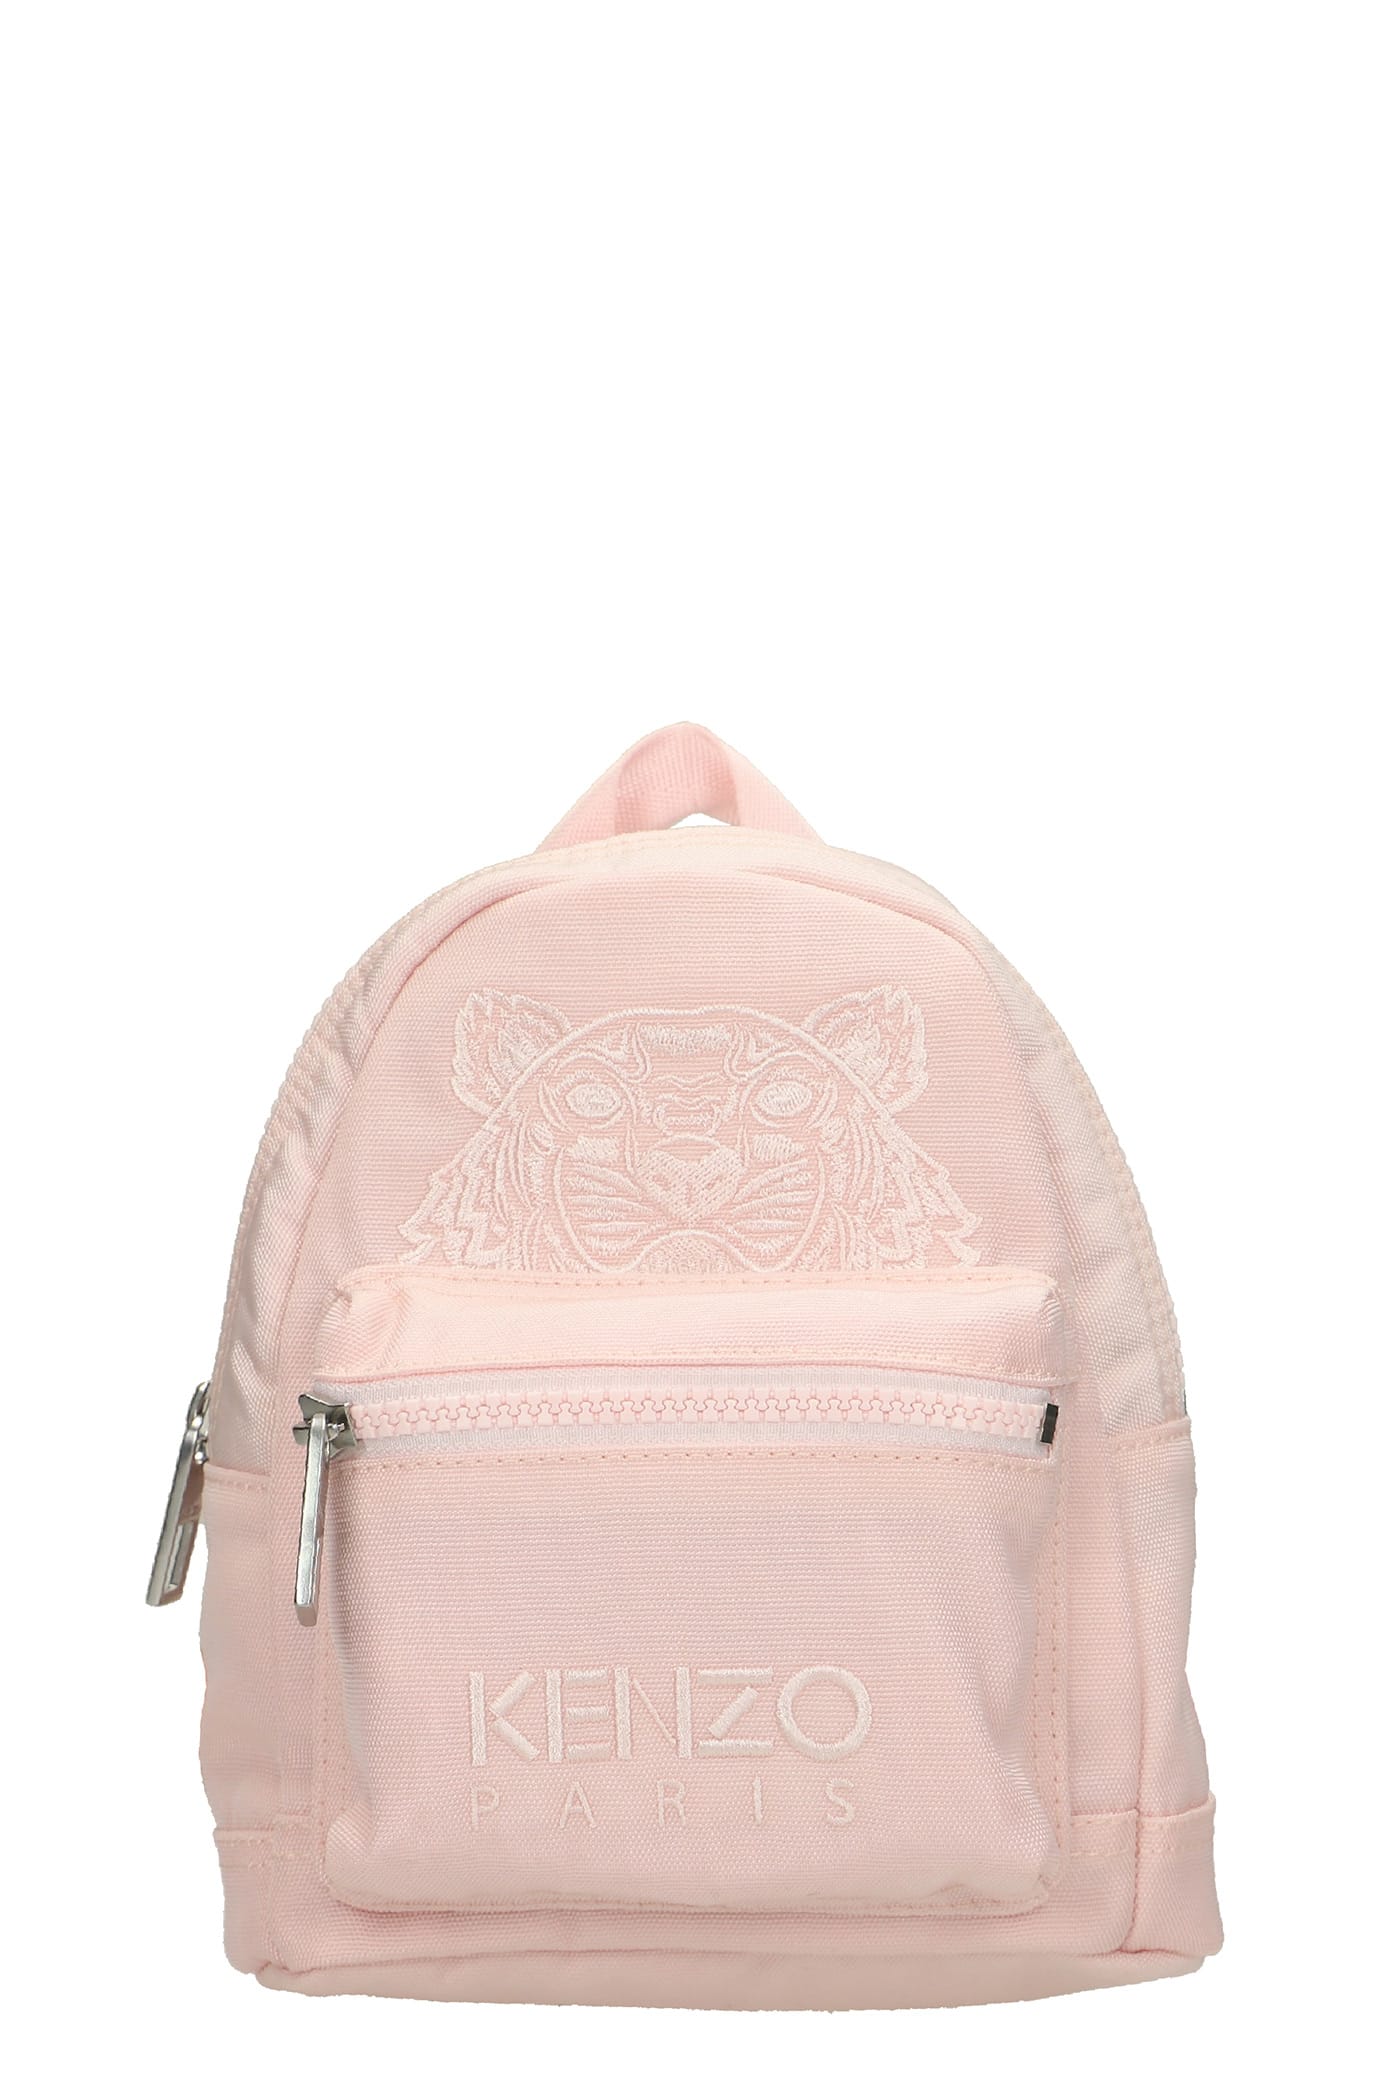 Kenzo Backpack In Rose-pink Polyester